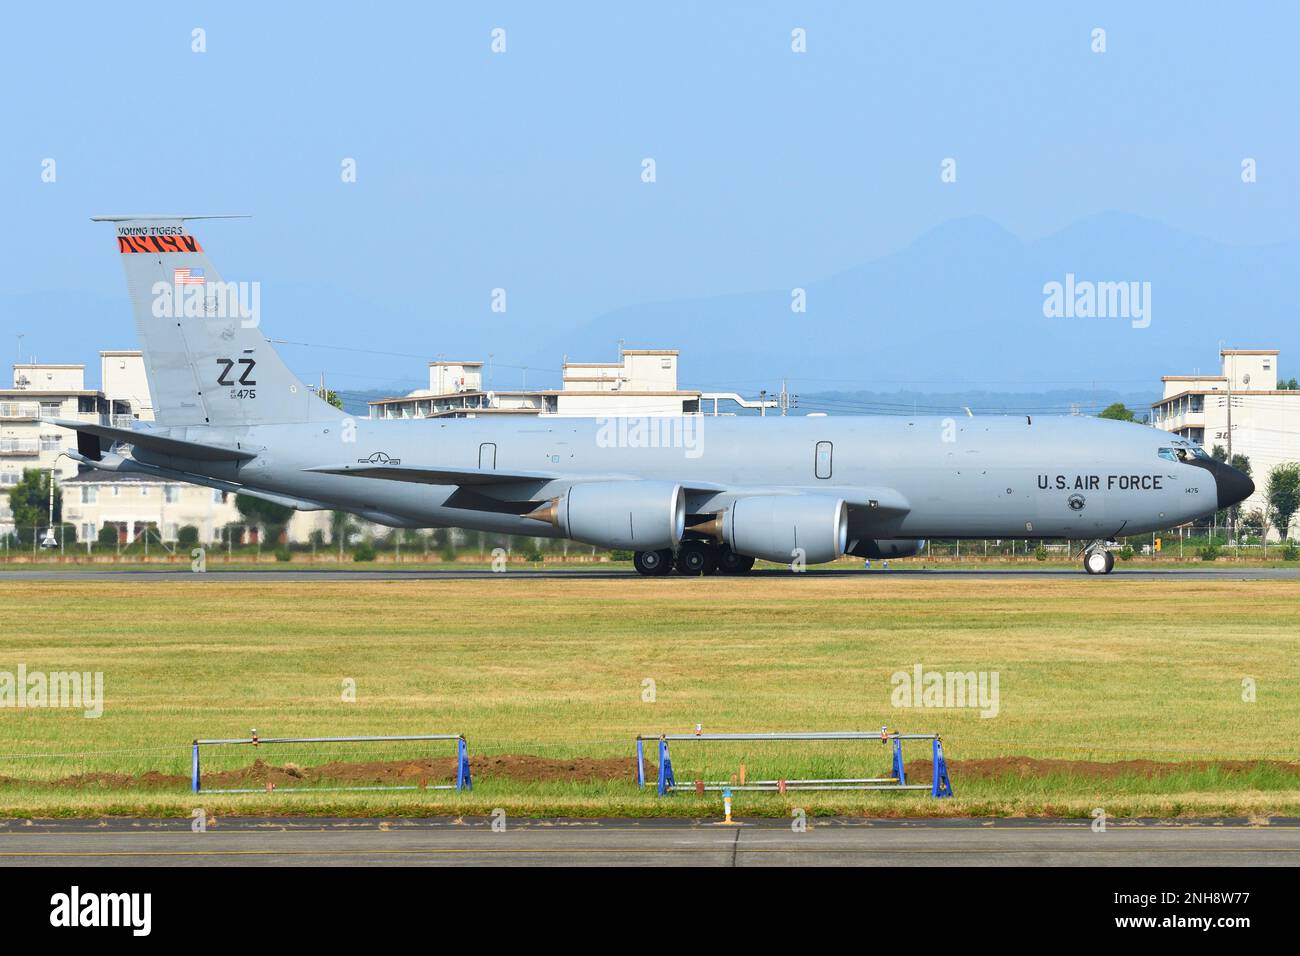 Tokyo, Japan - July 22, 2018: United States Air Force Boeing KC-135R Stratotanker aerial refuelling and transport aircraft. Stock Photo